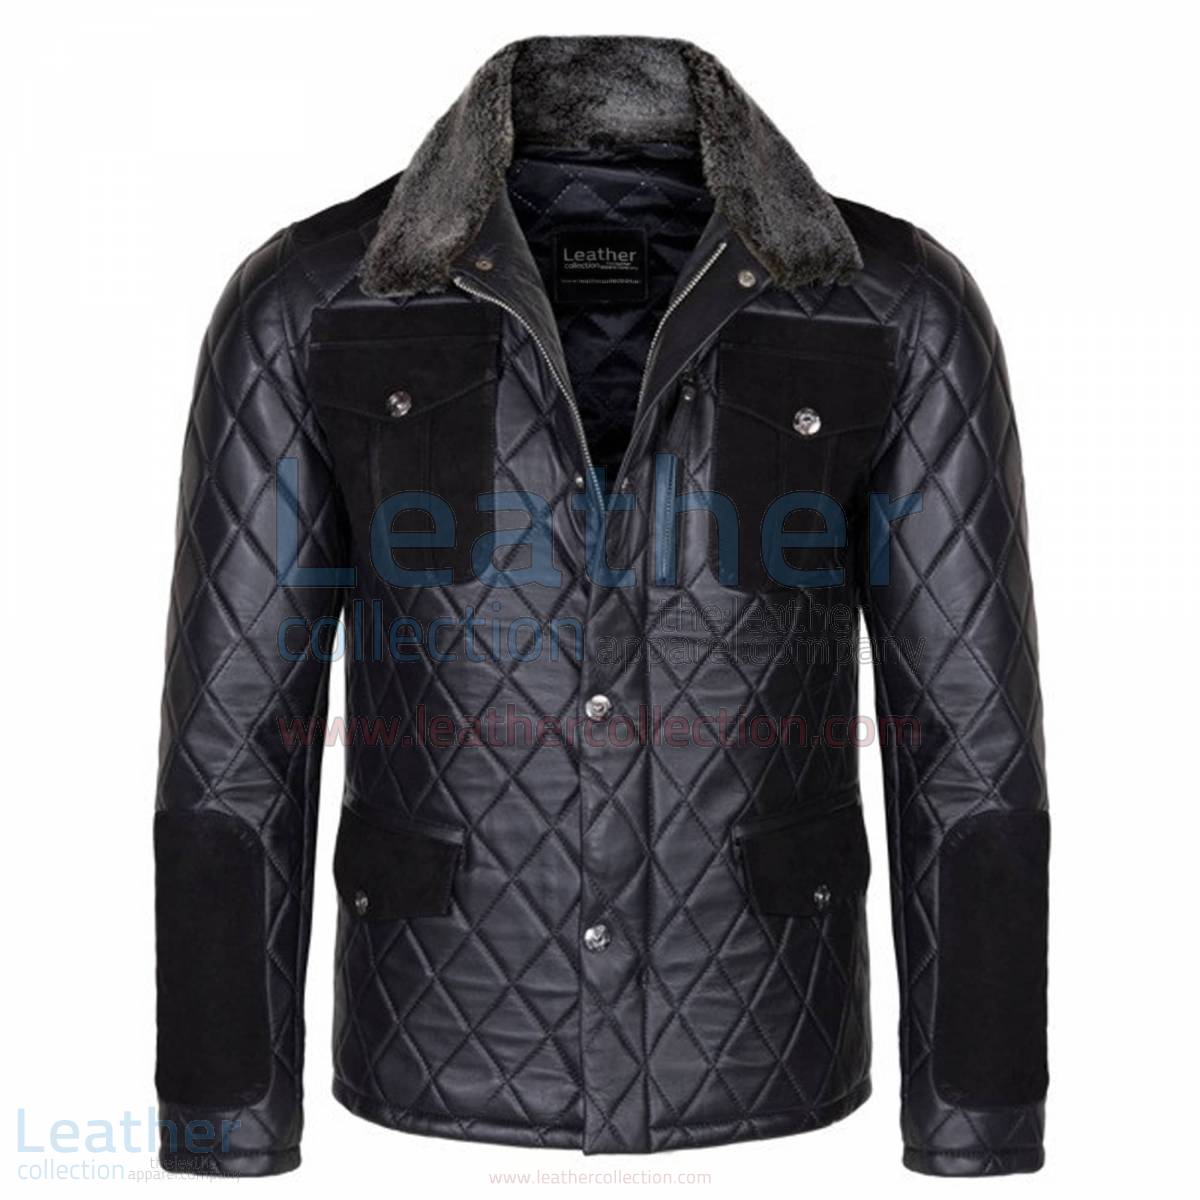 jacket with leather collar